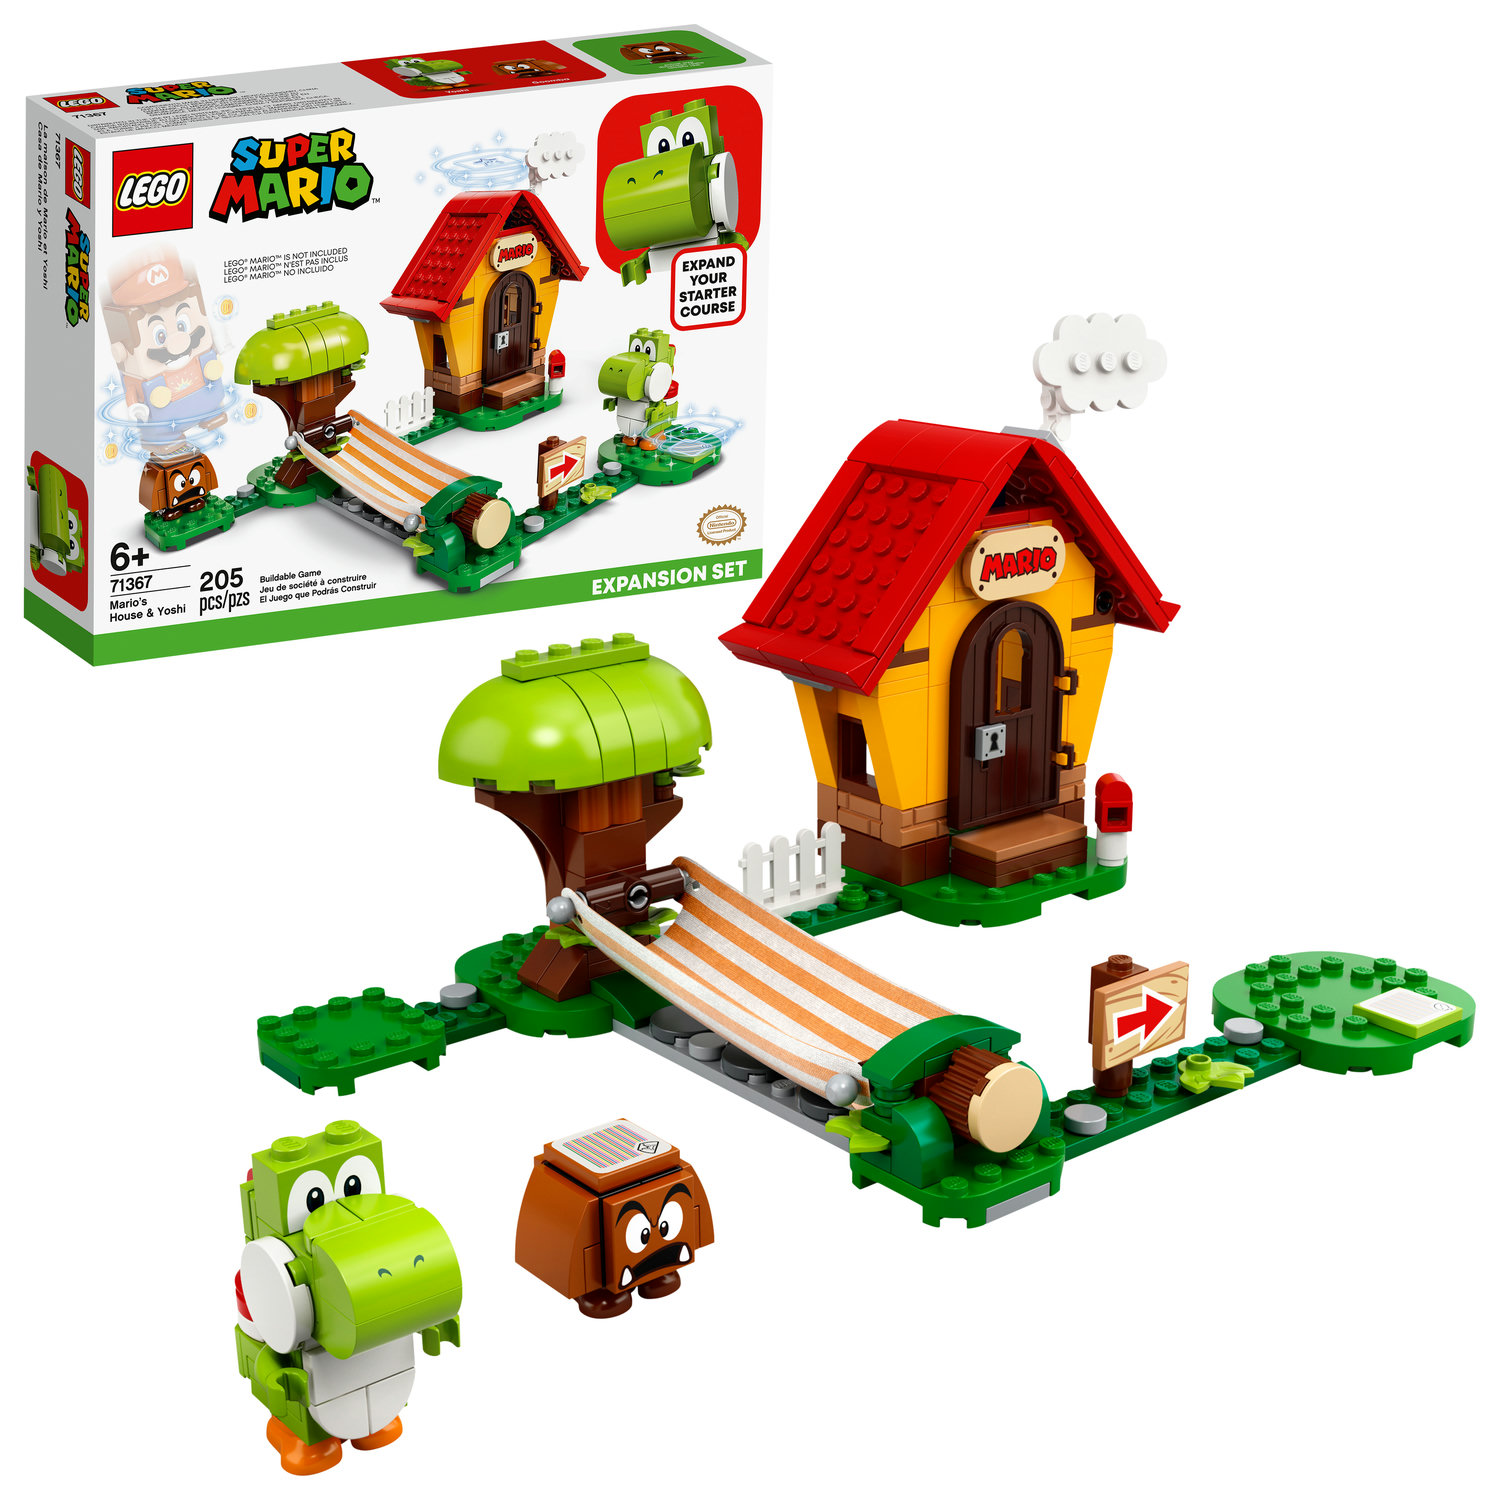 LEGO Super Mario Mario’s House & Yoshi Expansion Set 71367 Building Toy for Kids (205 Pieces) - image 1 of 5